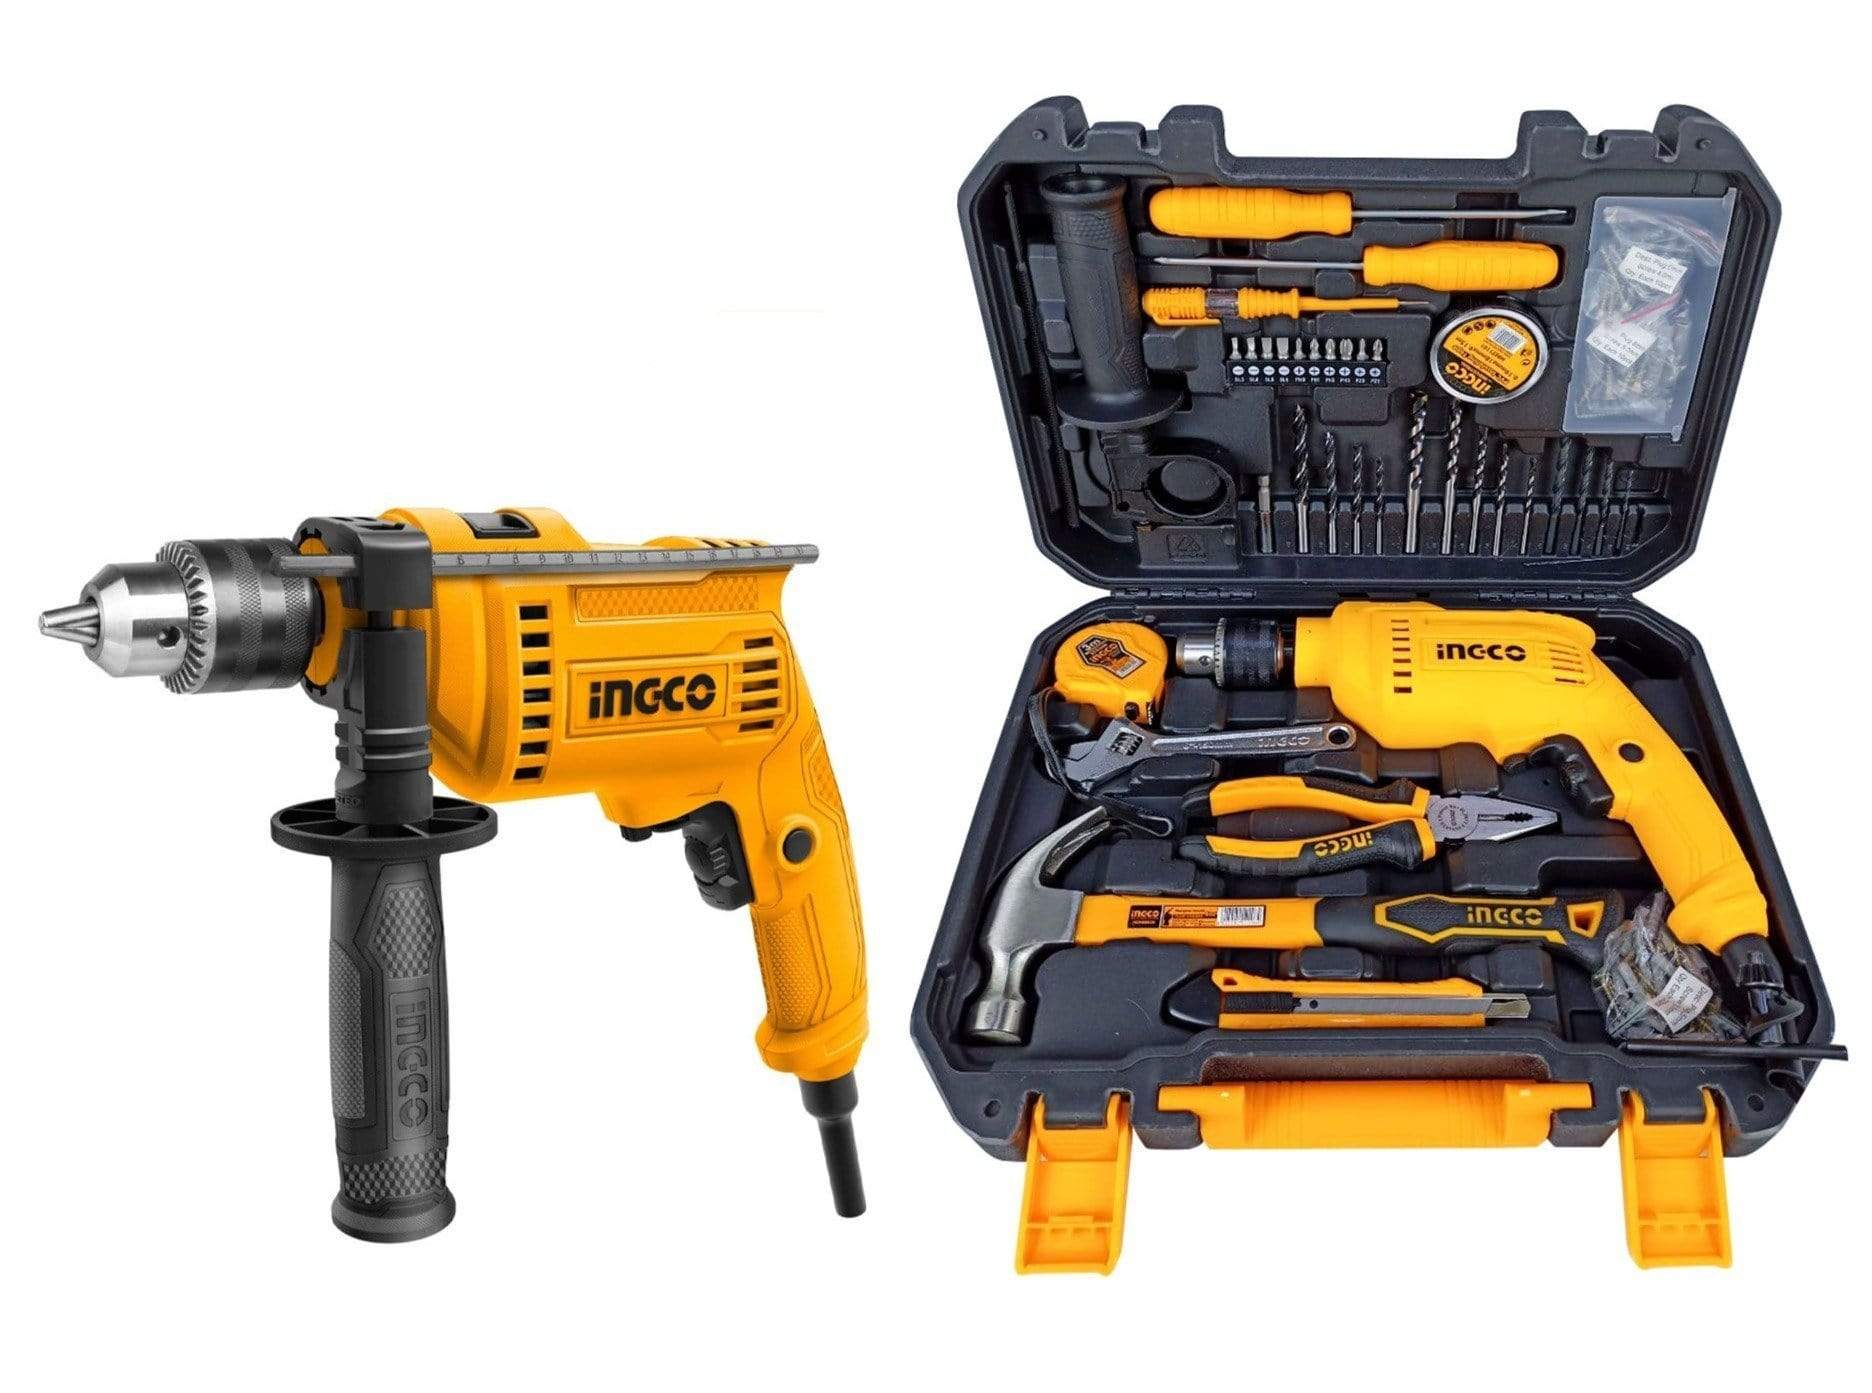 Ingco 115 Pieces Tools Set with 680W Hammer Impact Drill - HKTHP11151 | Supply Master | Accra, Ghana Tools Building Steel Engineering Hardware tool